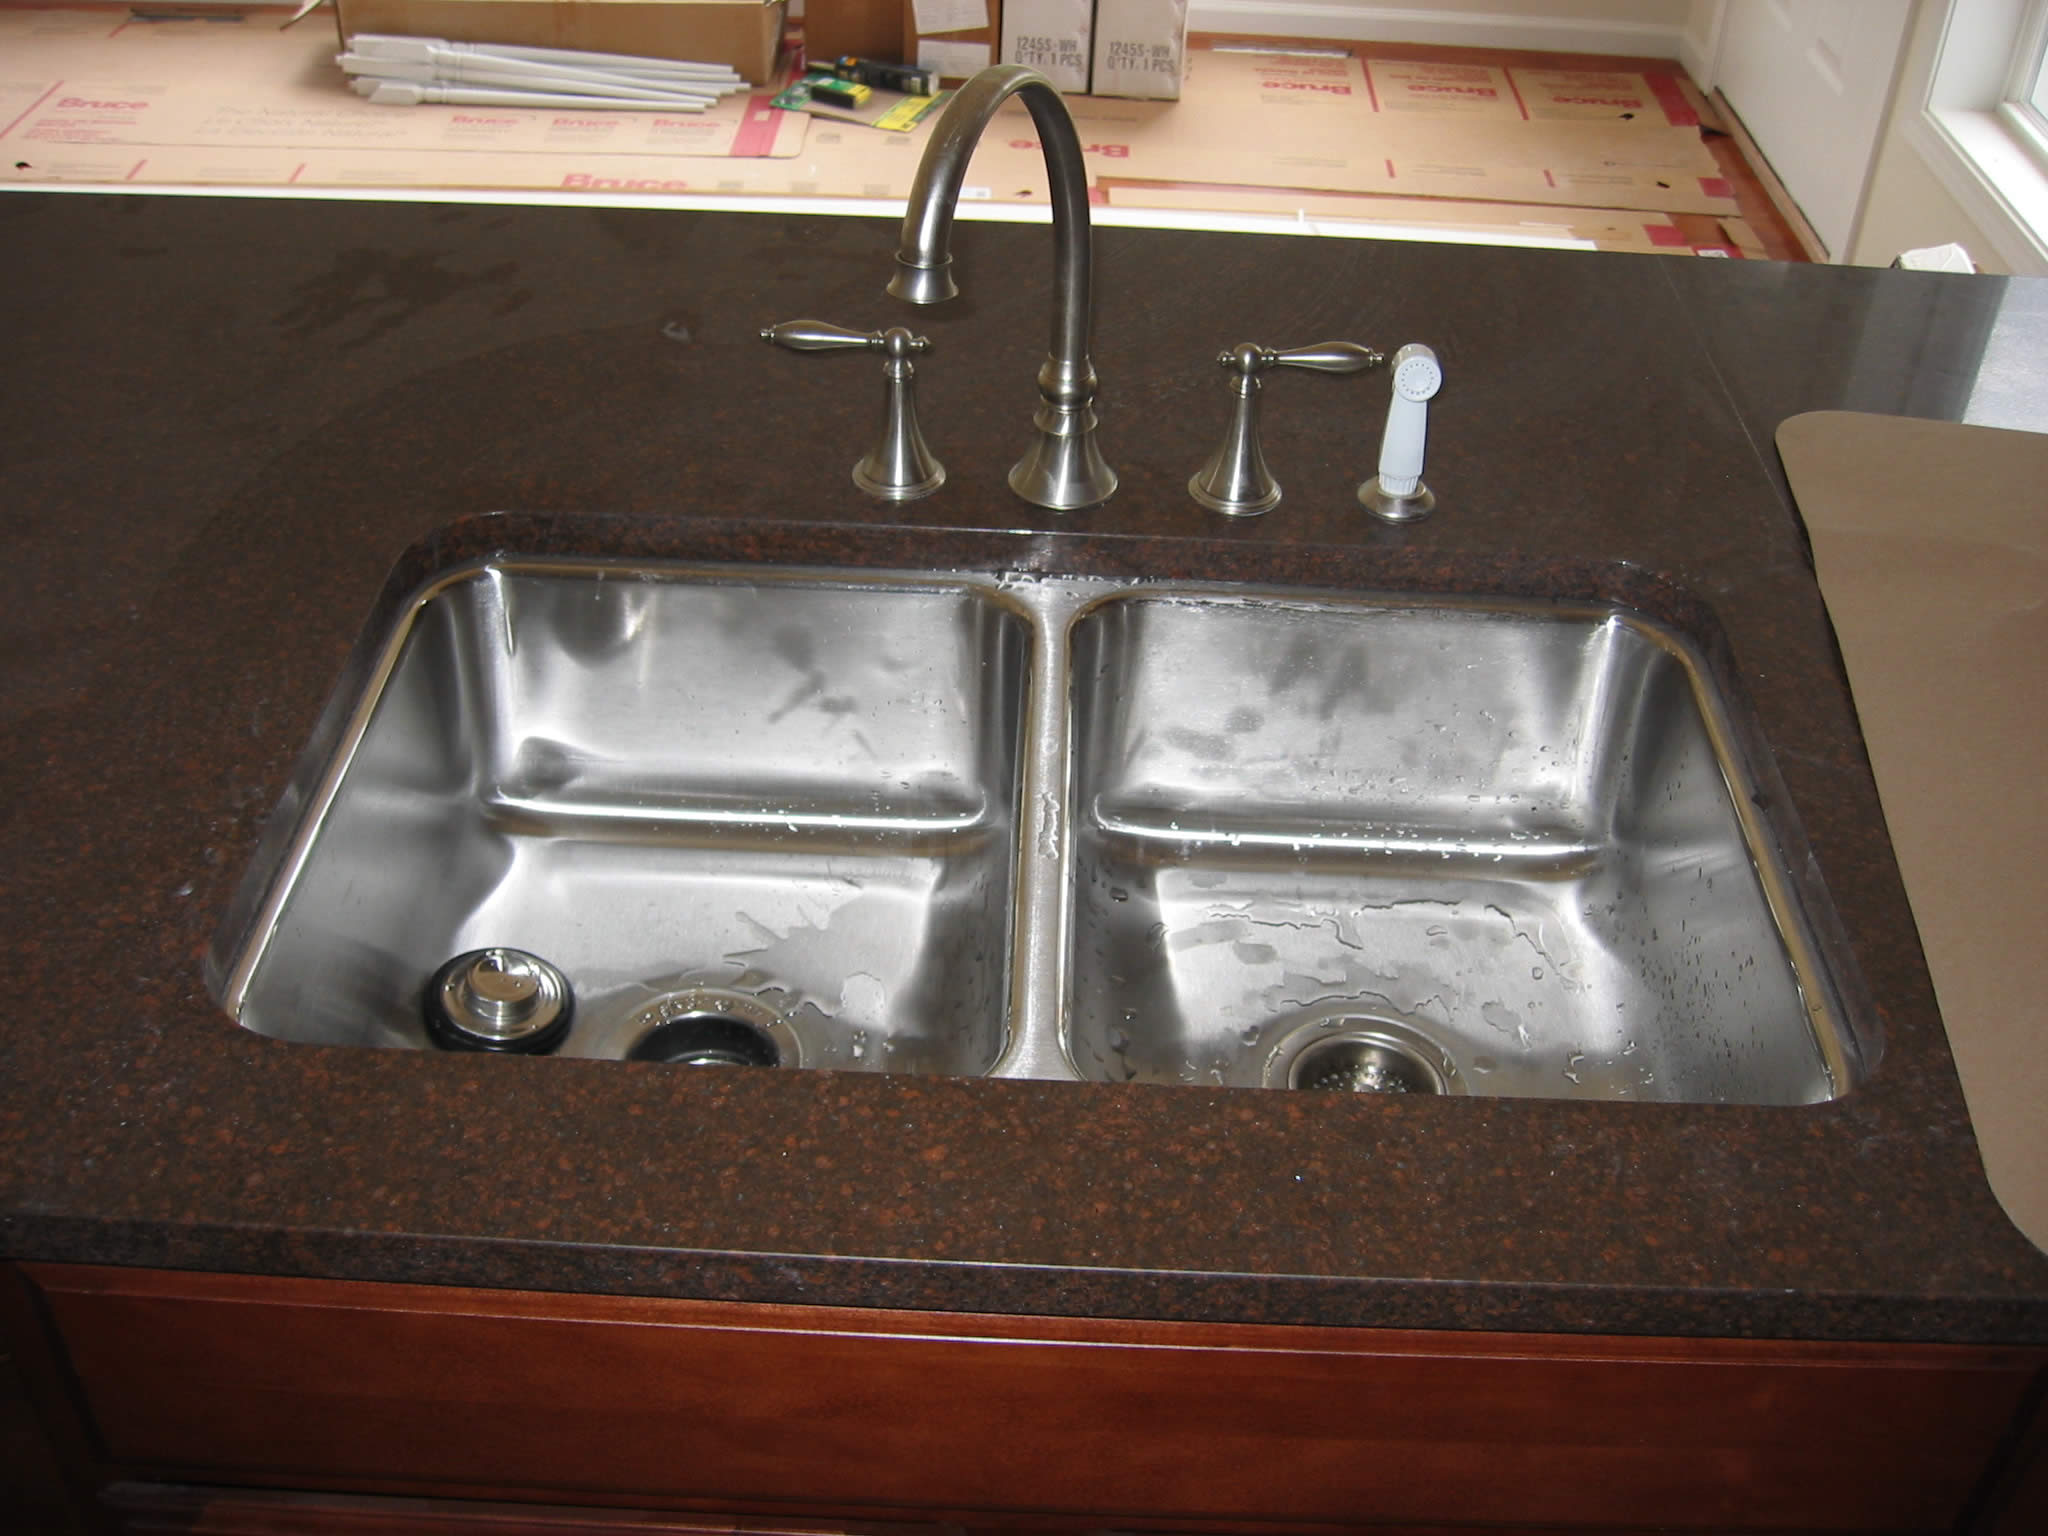 The Kitchen Sink and Countertop